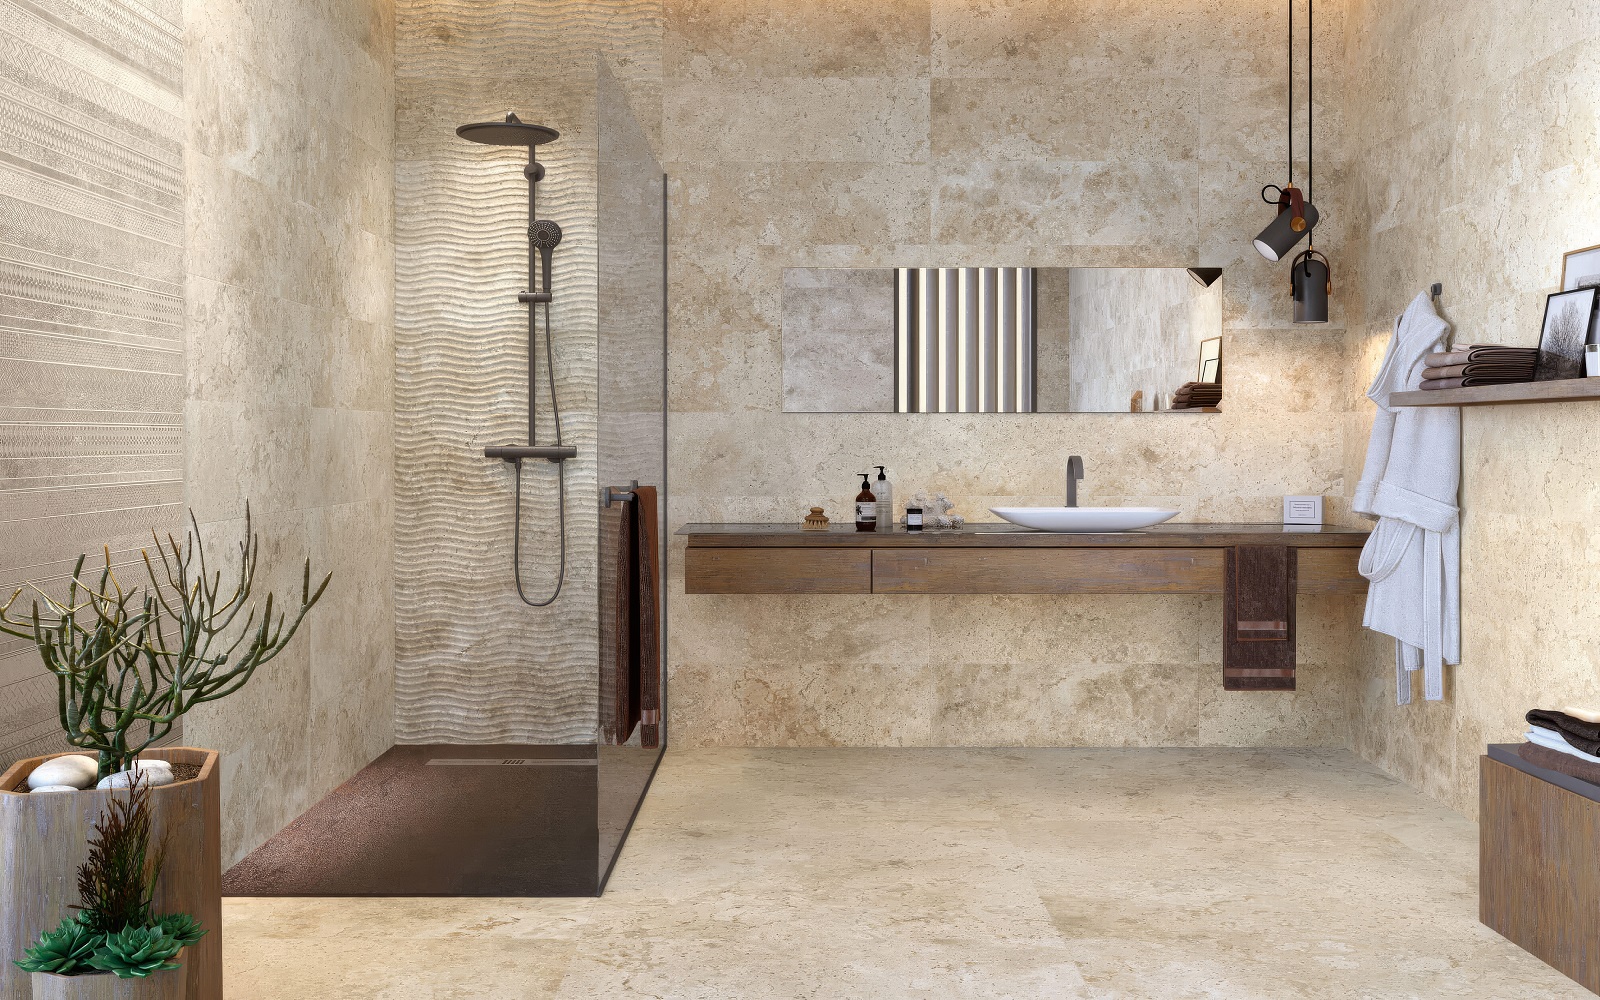 bathroom with natural stone colours and textures in large format tiles on floor and walls from Hyperion Tiles